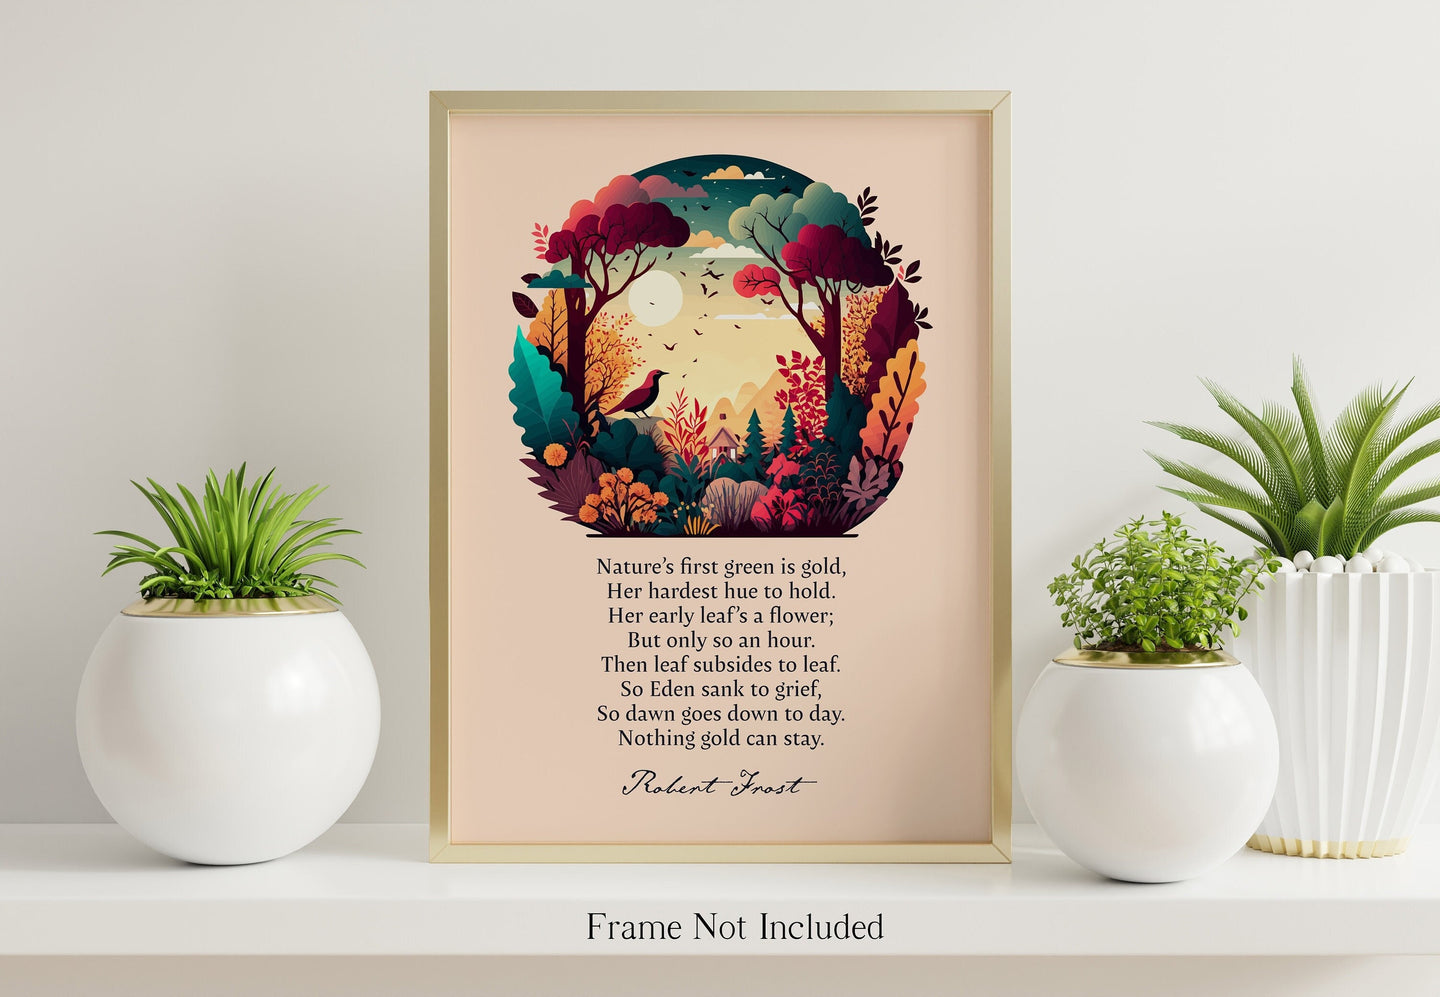 Nothing Gold Can Stay - Robert Frost Poem Print - Nature's first green is gold. Poetry Poster - Physical Print Without Frame